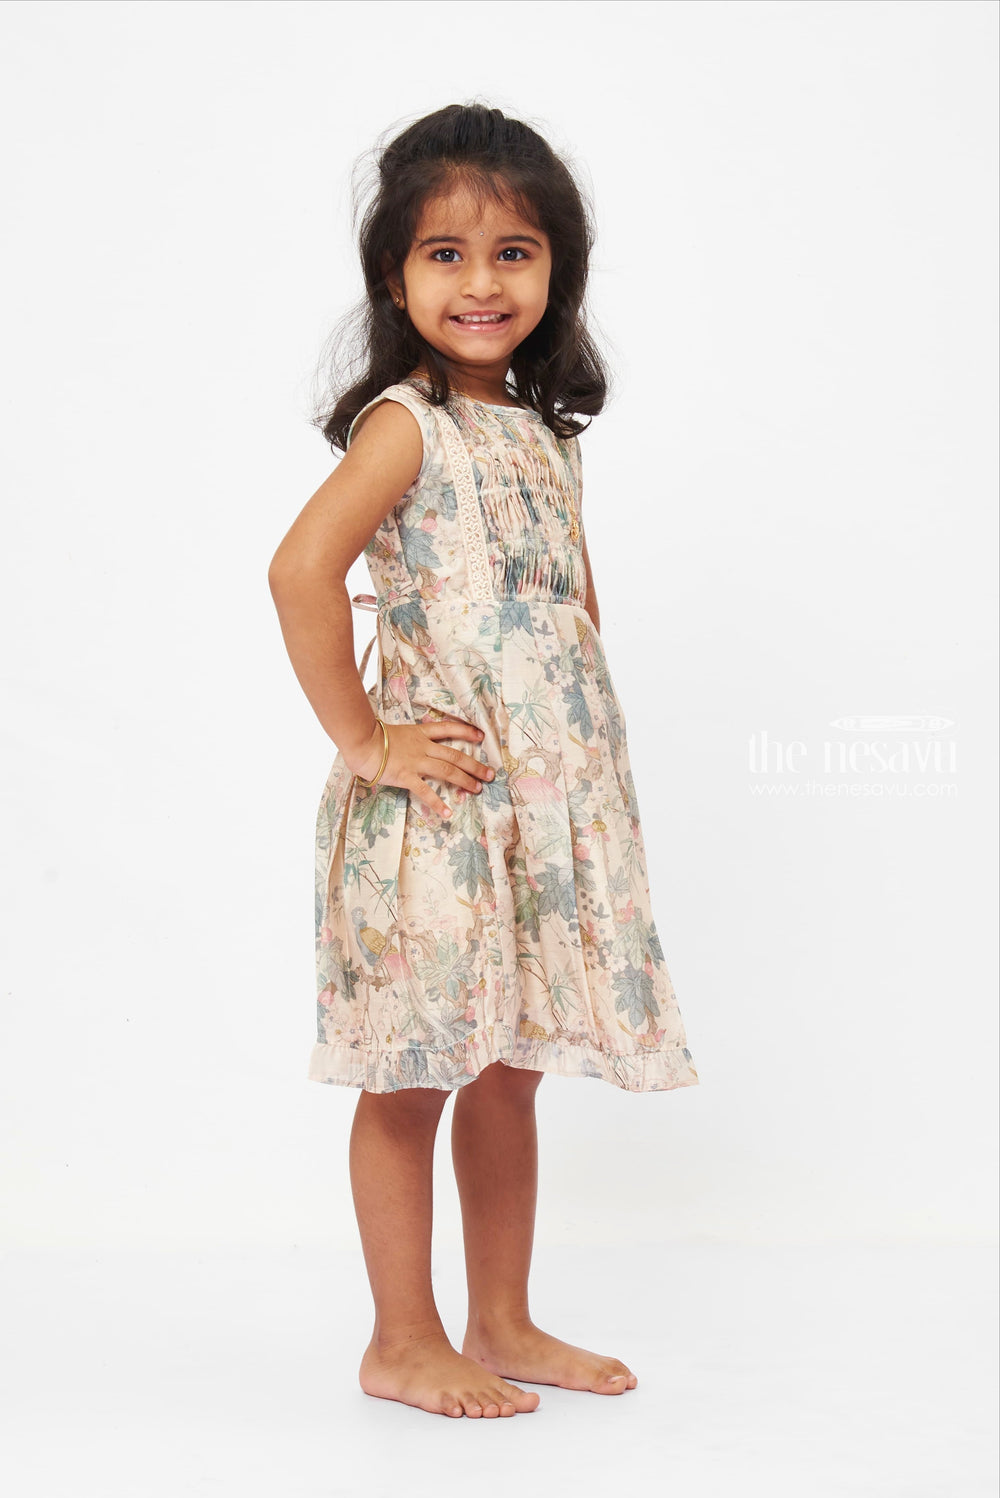 The Nesavu Girls Cotton Frock Enchanted Forest Frolic Dress: Whimsical Bird & Foliage Print Frock for Girls Nesavu Girls Storybook Bird Print Dress | Lace Trimmed Foliage Frock | Magical Everyday Wear | The Nesavu